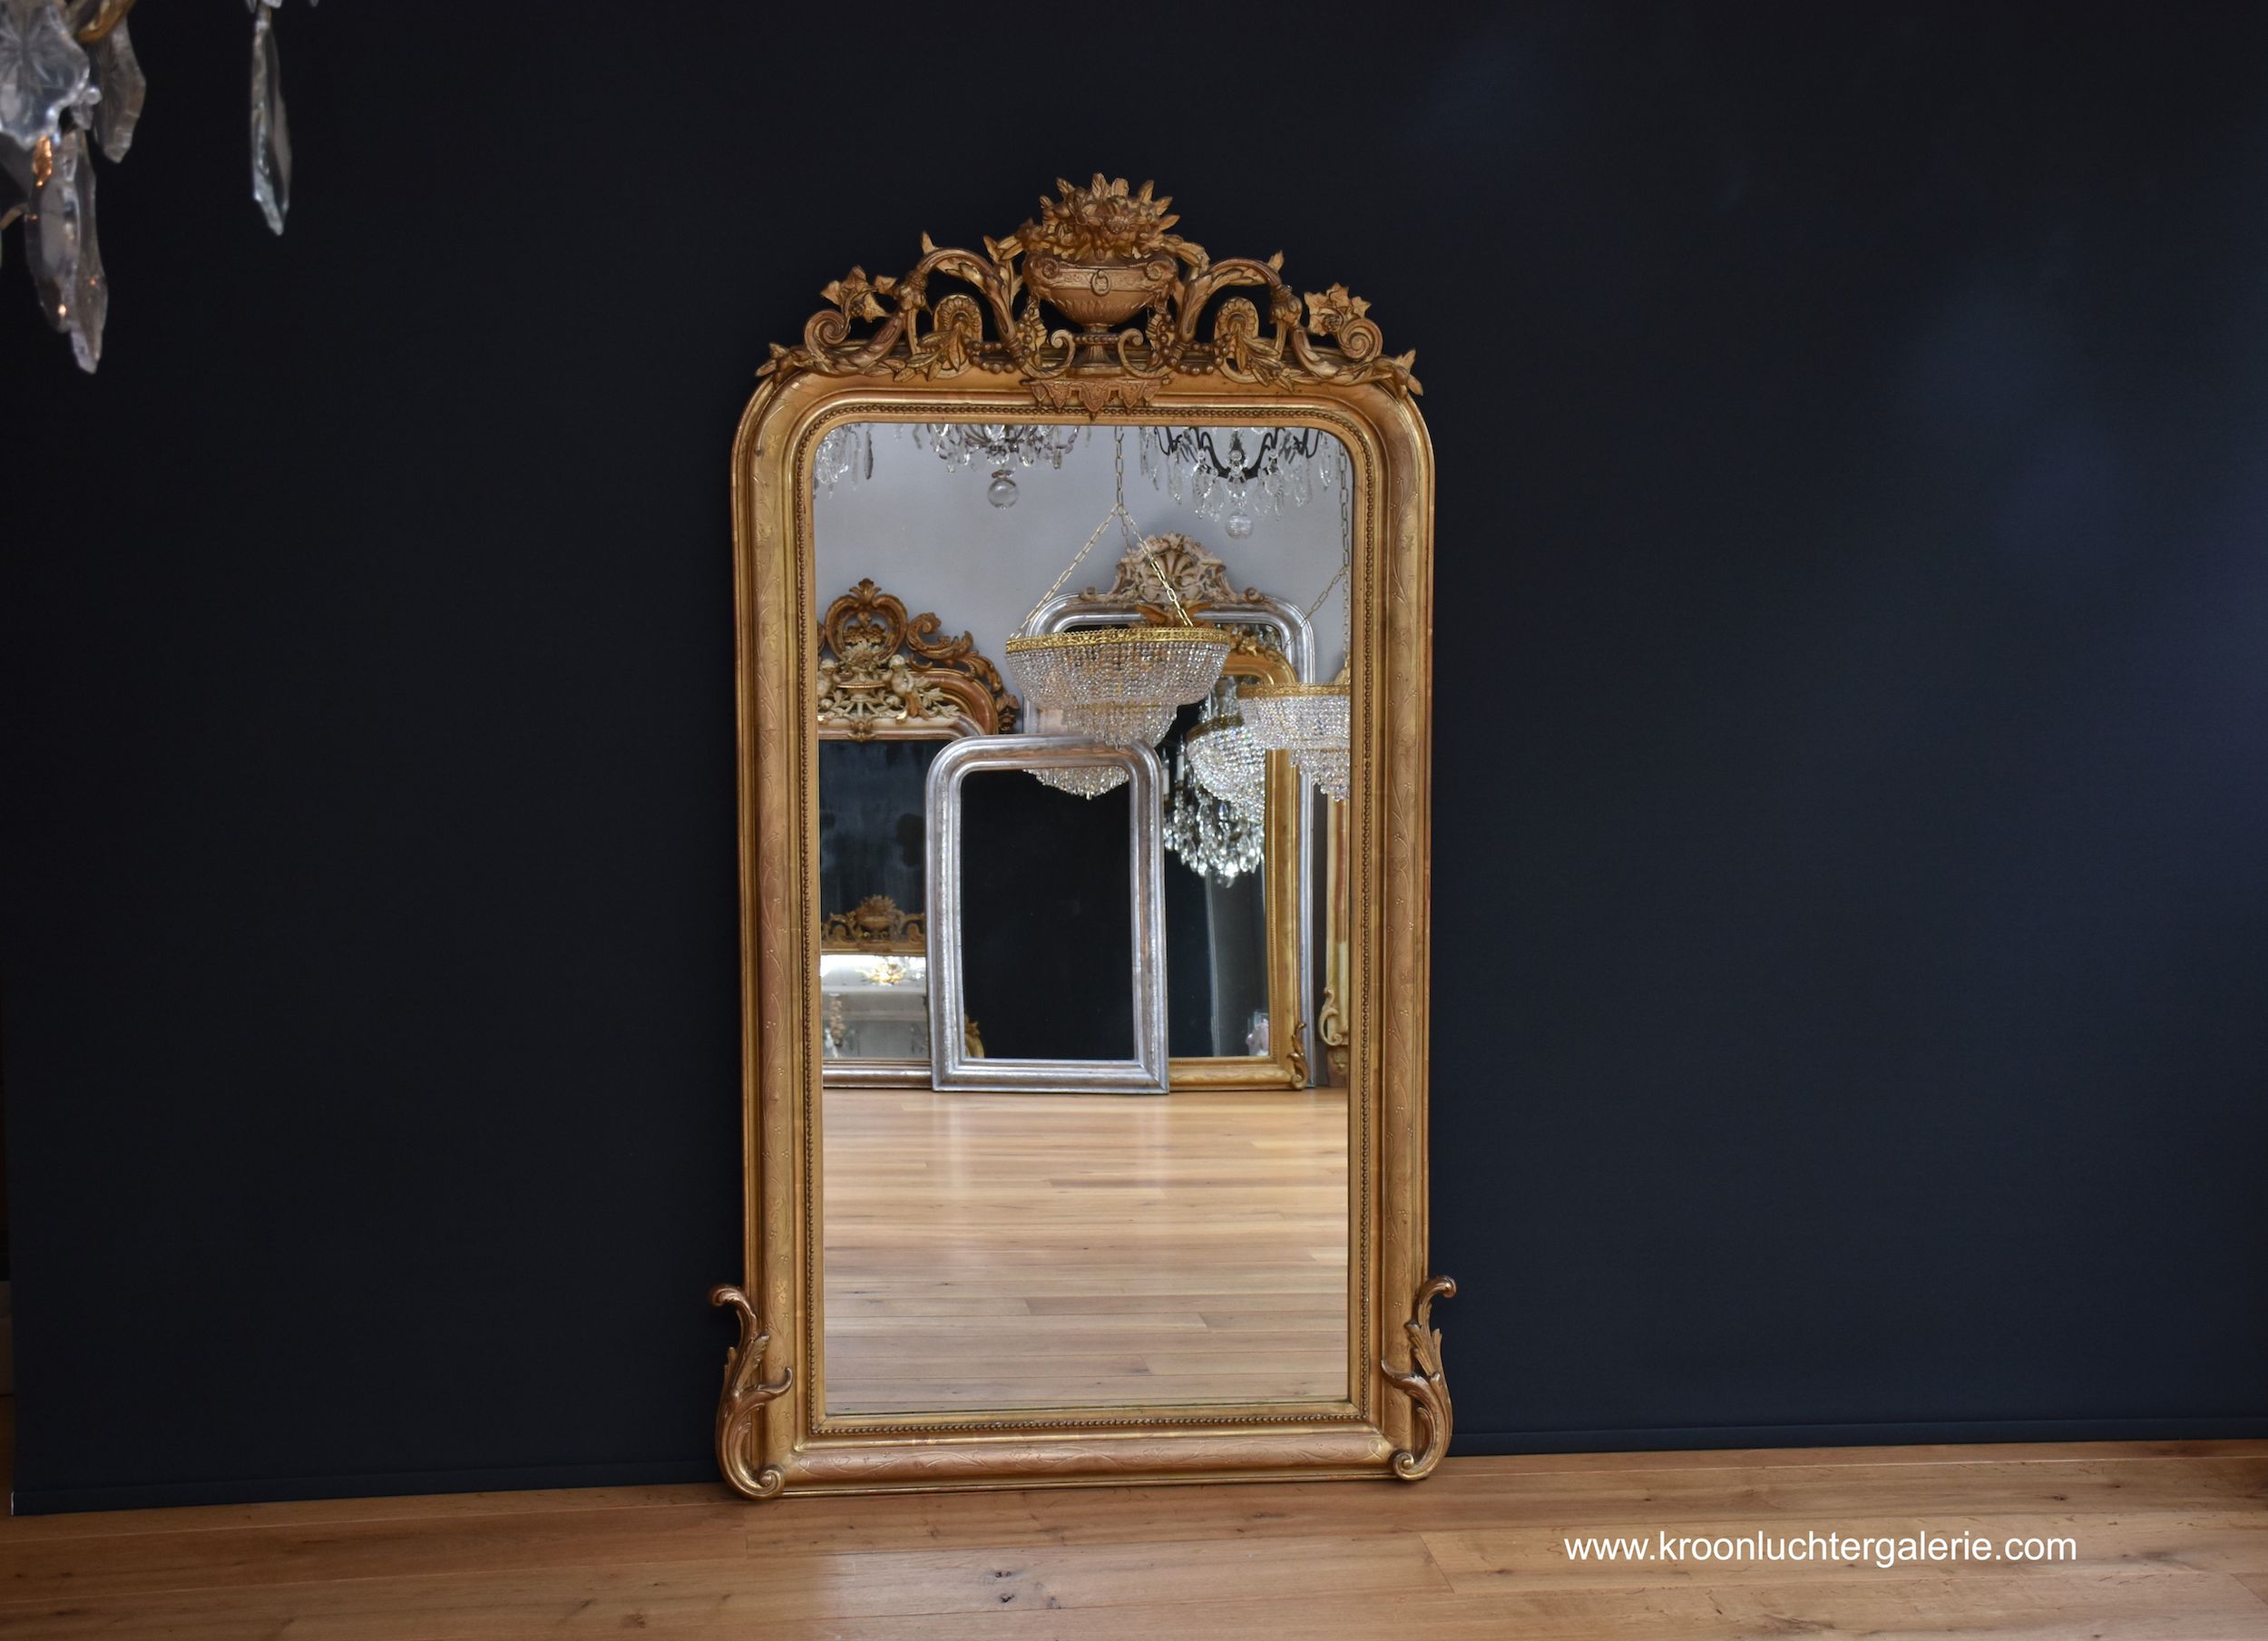 Antique French mirror with a crest, gold-leaf